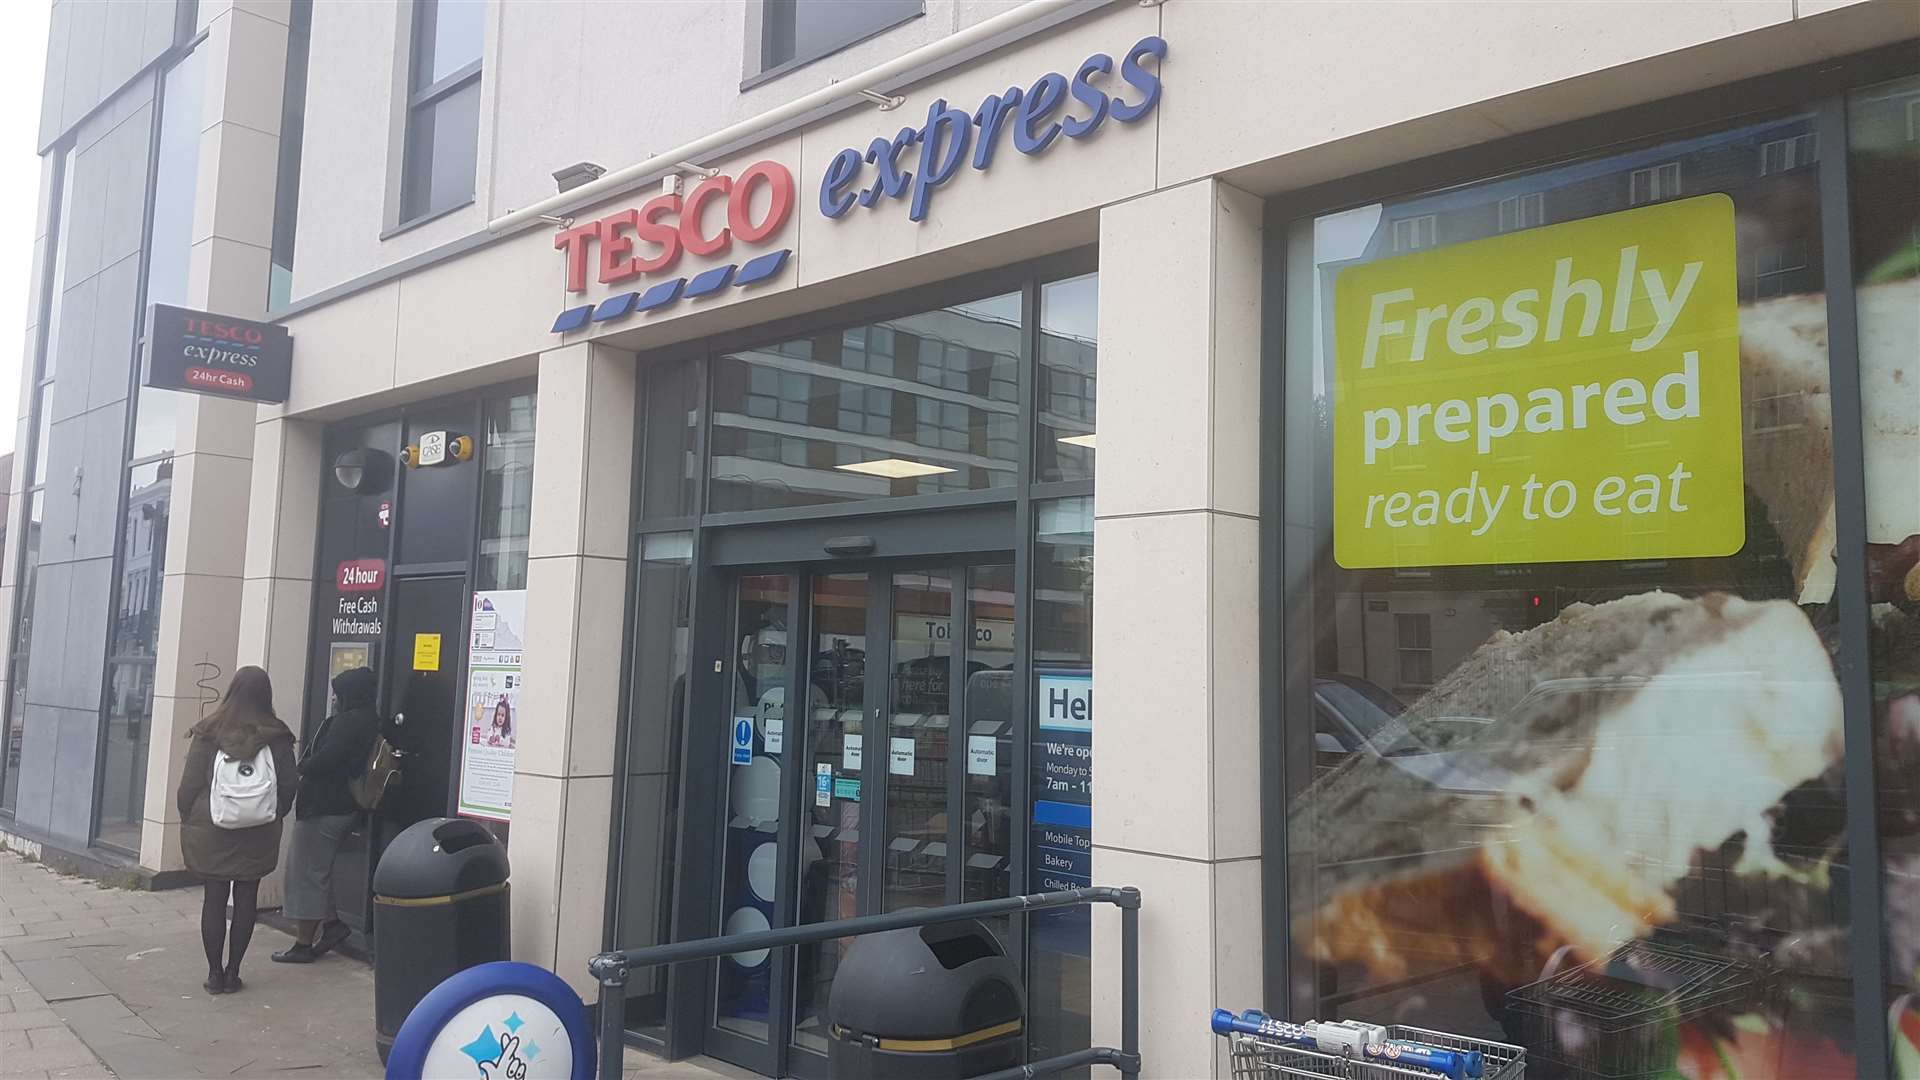 The Tesco Express in New Dover Road (8469416)